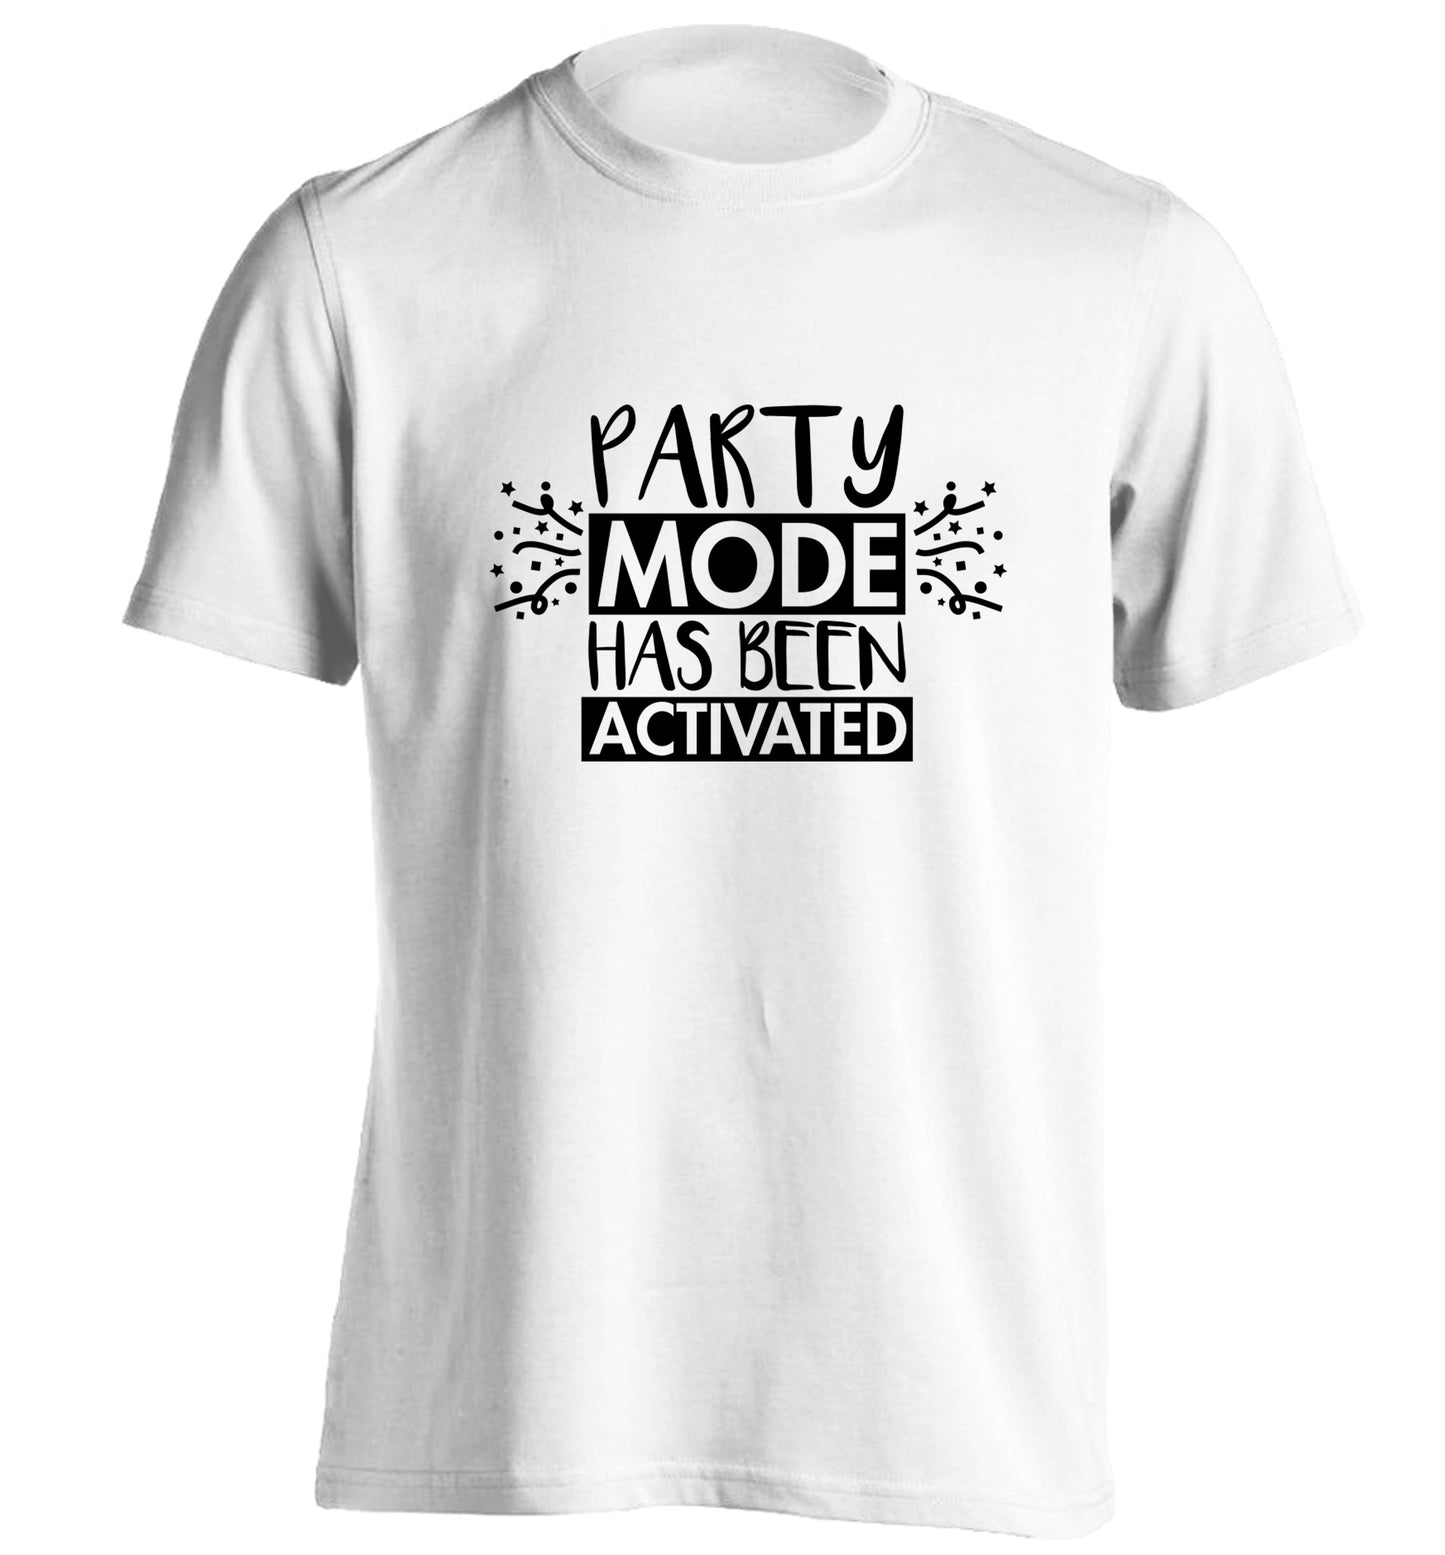 Please do not disturb party mode has been activated adults unisex white Tshirt 2XL